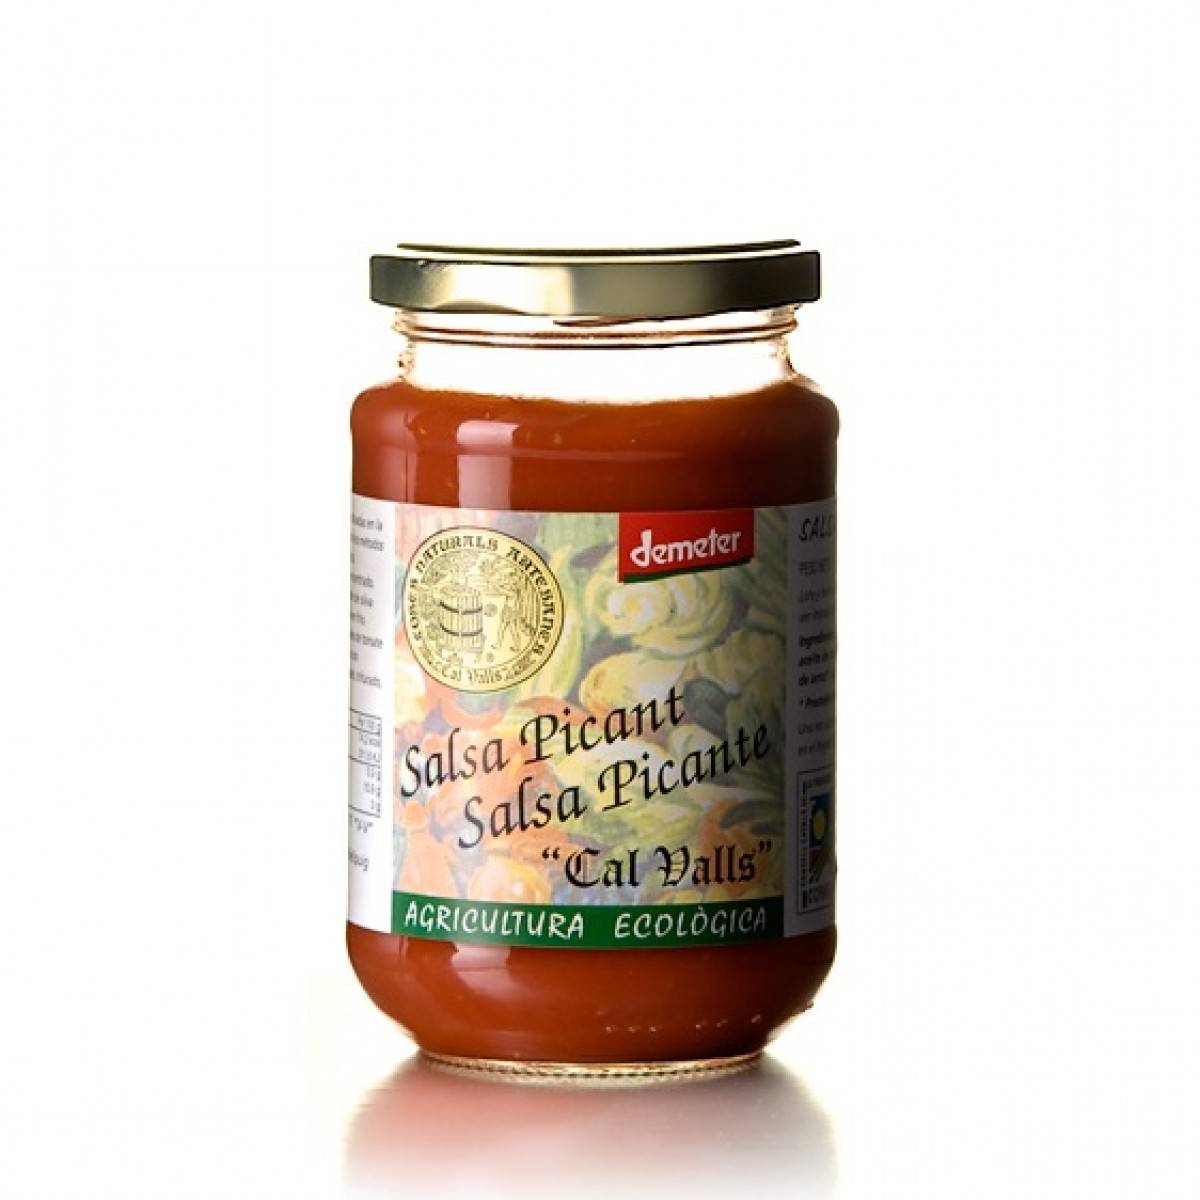 CAL VALLS SALSA TOMATE PICANTE 350grs